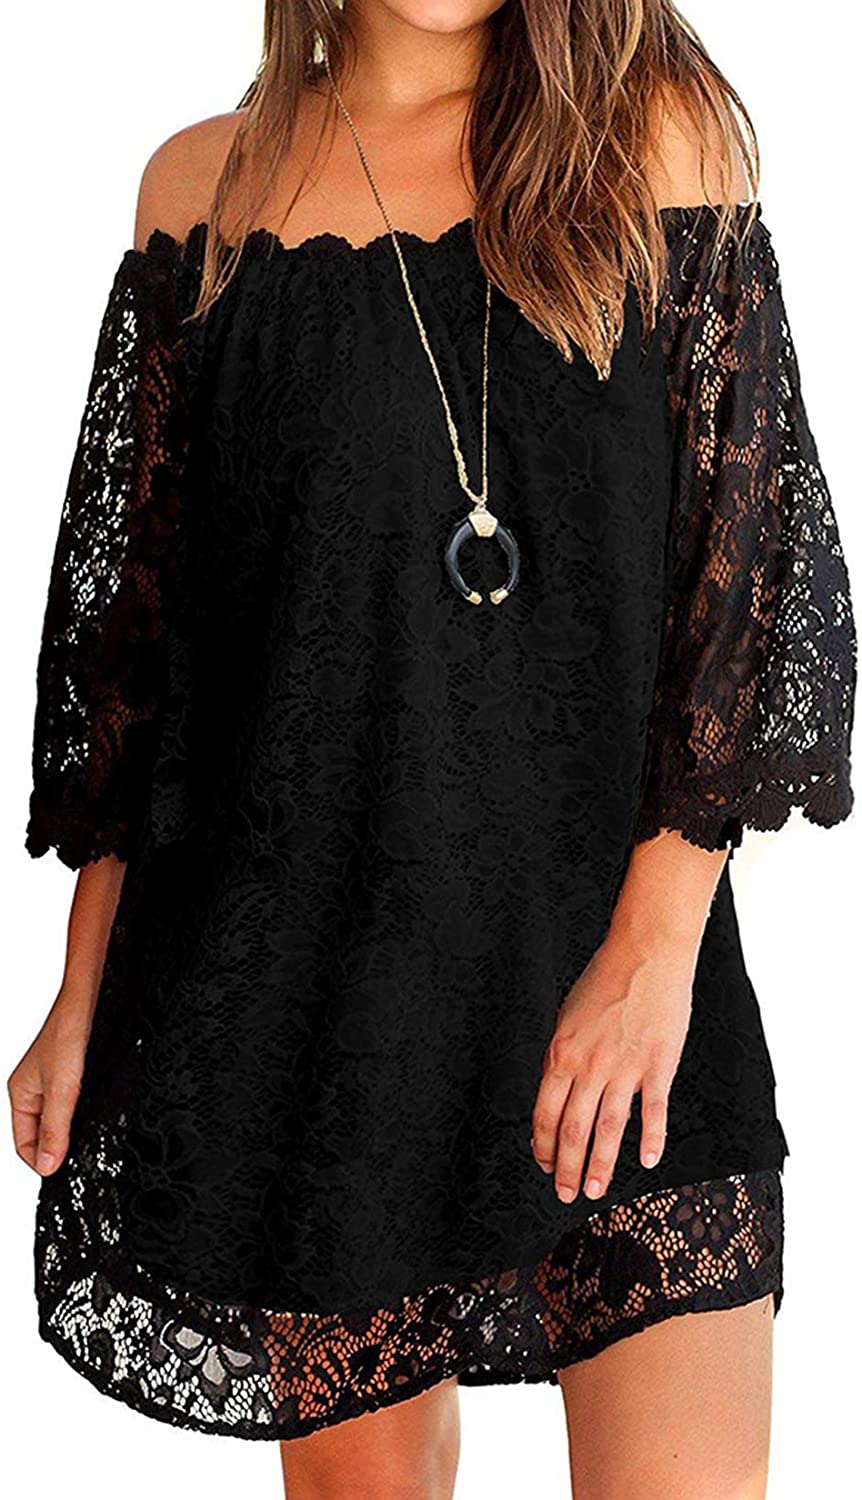 OURS Women's Casual Off Shoulder Lace Shift Loose Mini Dress with 3/4 Sleeve  | eBay